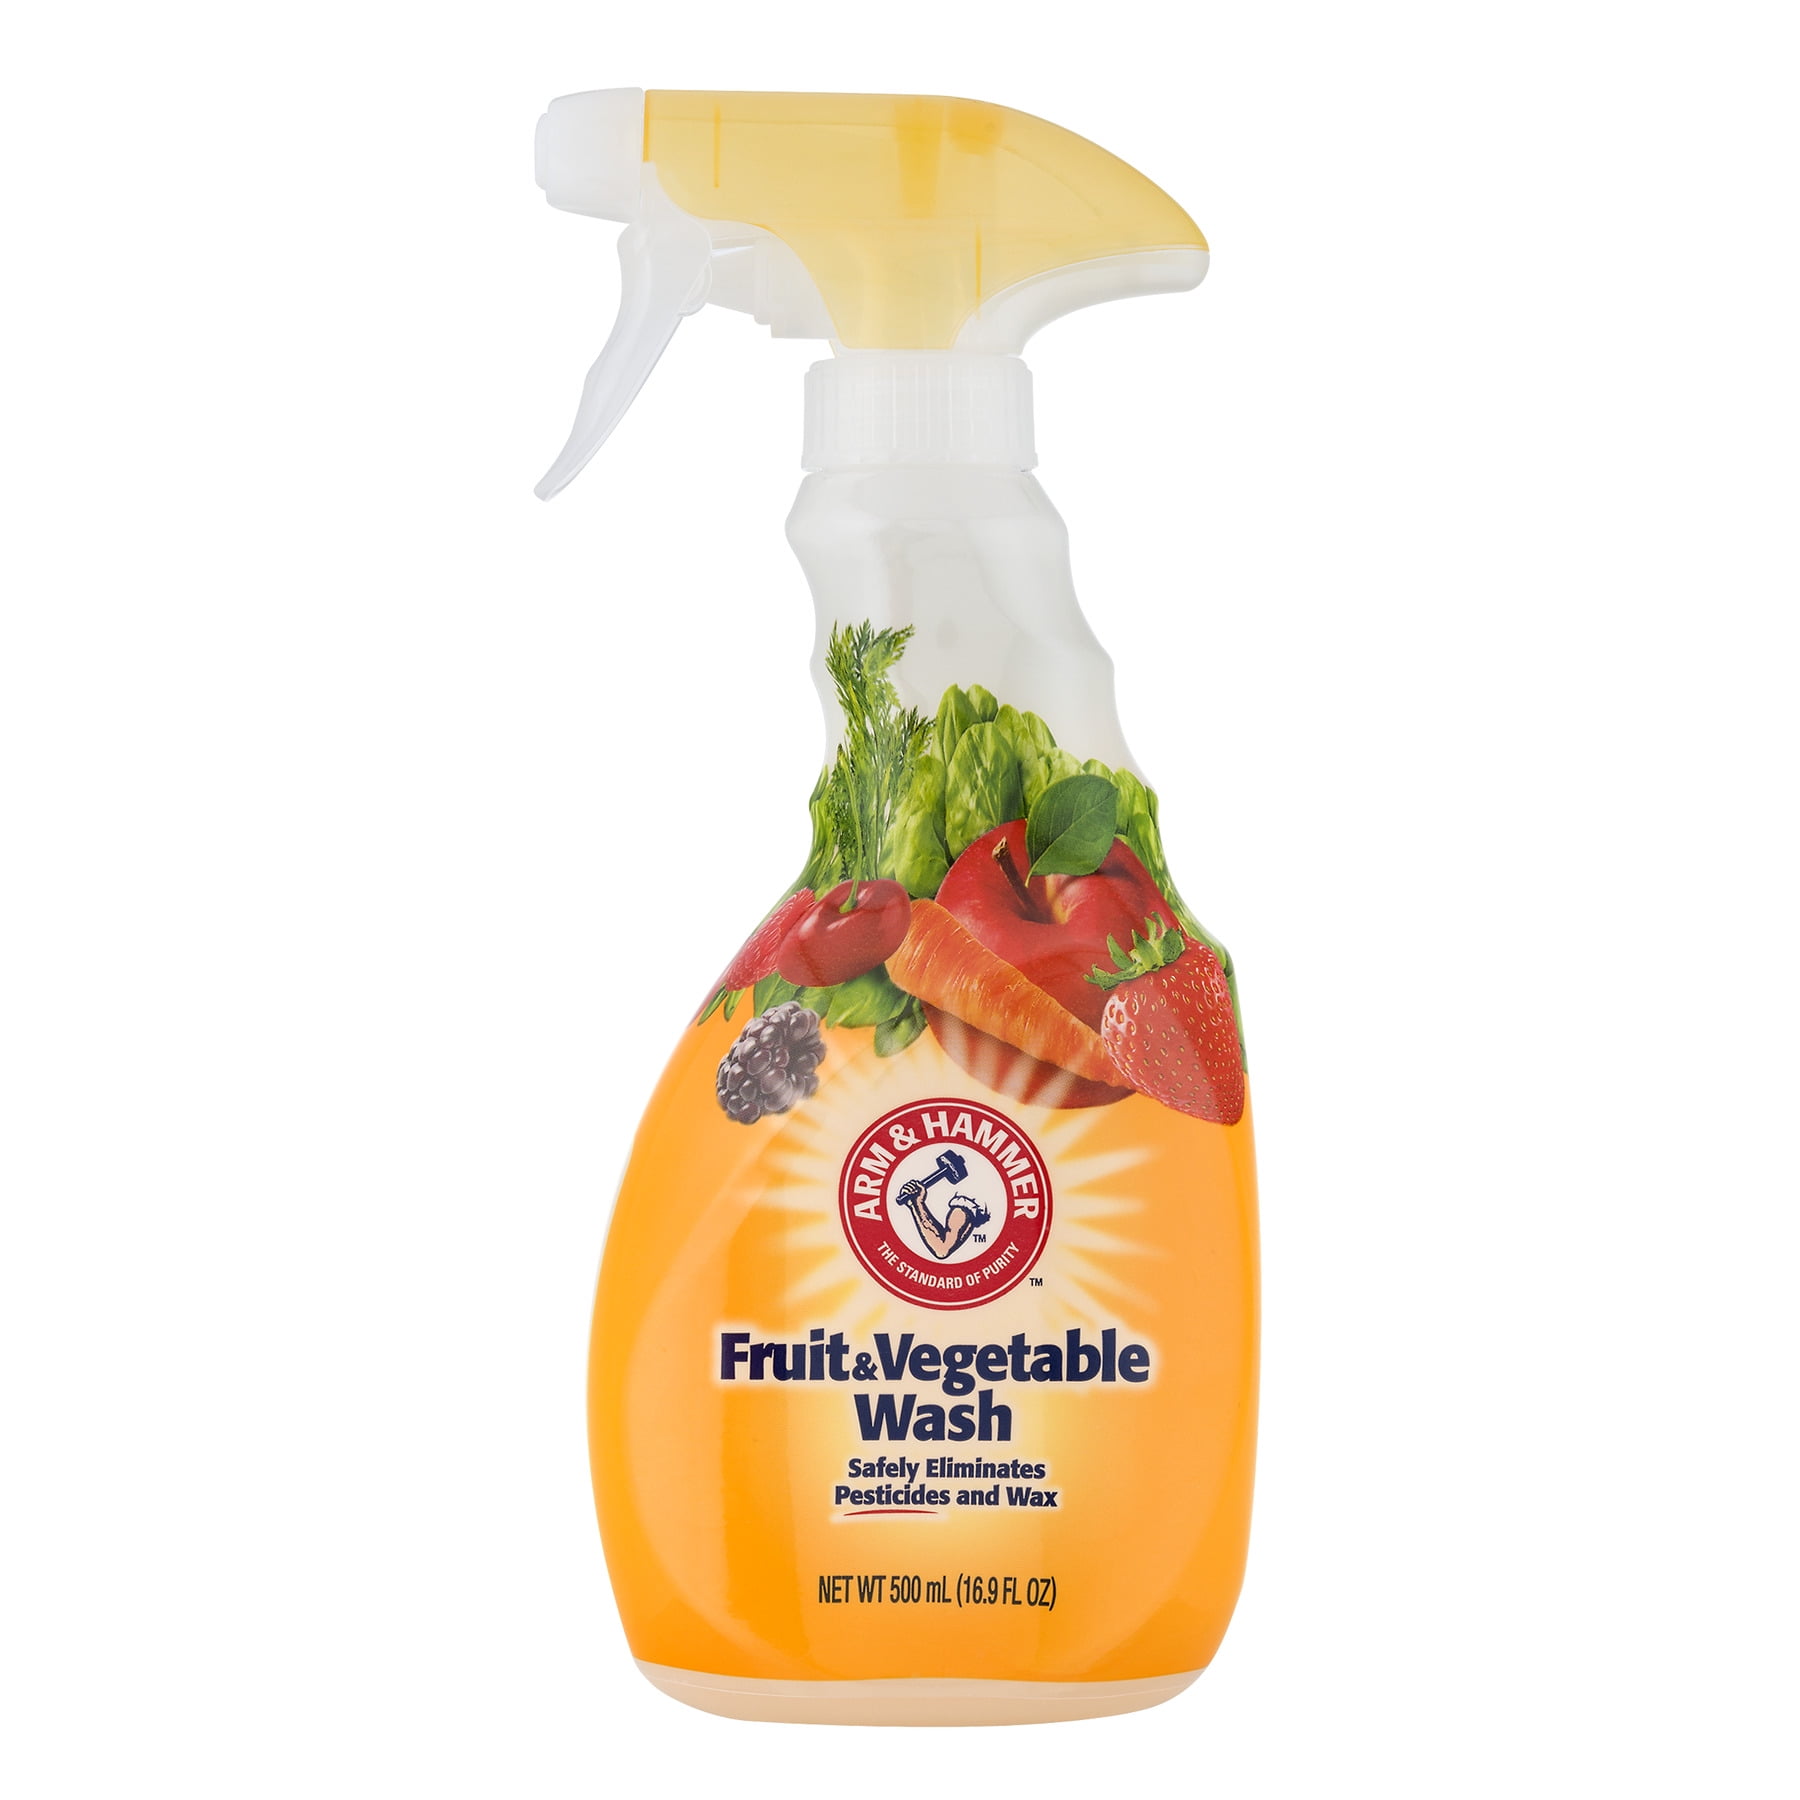  Veggie Wash Fruit & Vegetable Wash, Produce Wash and Cleaner,  16-Fluid Ounce, CASE of 12 : Health & Household